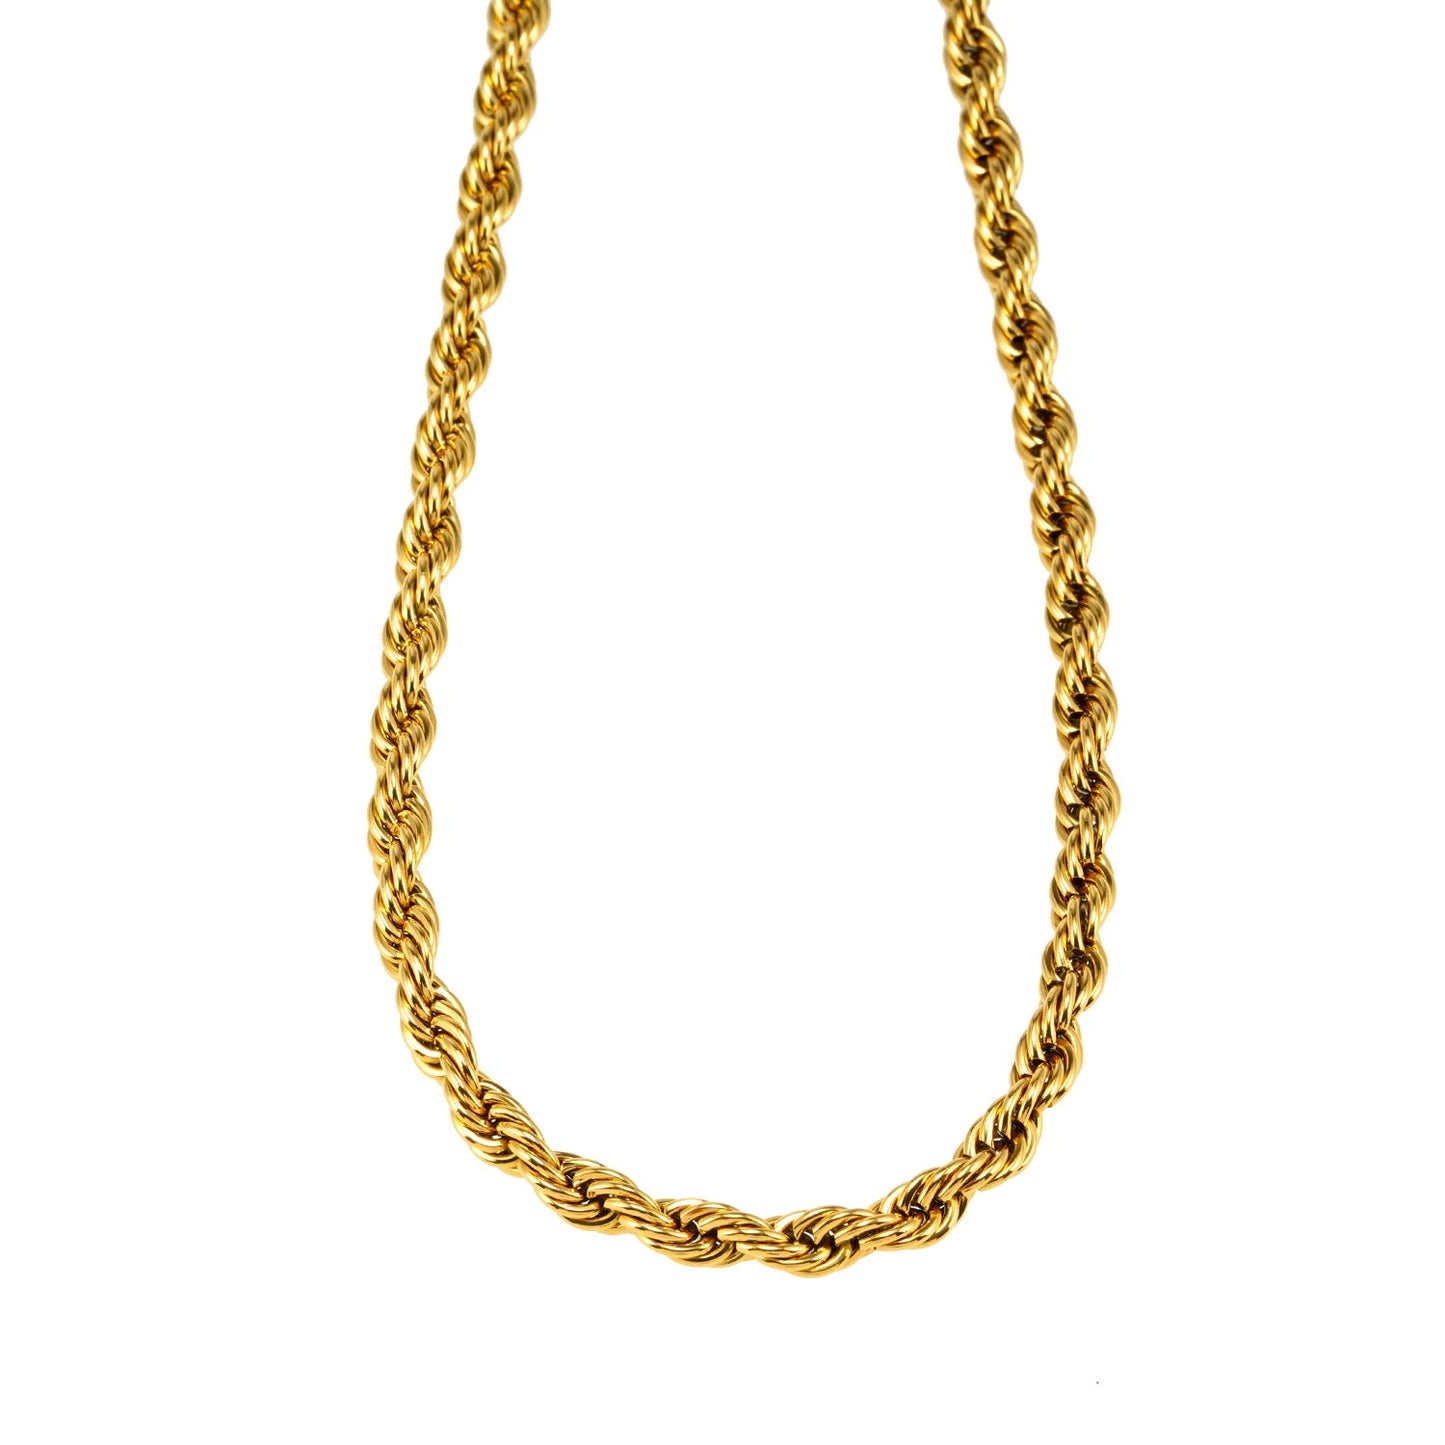 Style ARKELEY 7753: Chunky Rope Chain Textured Gold Necklace.